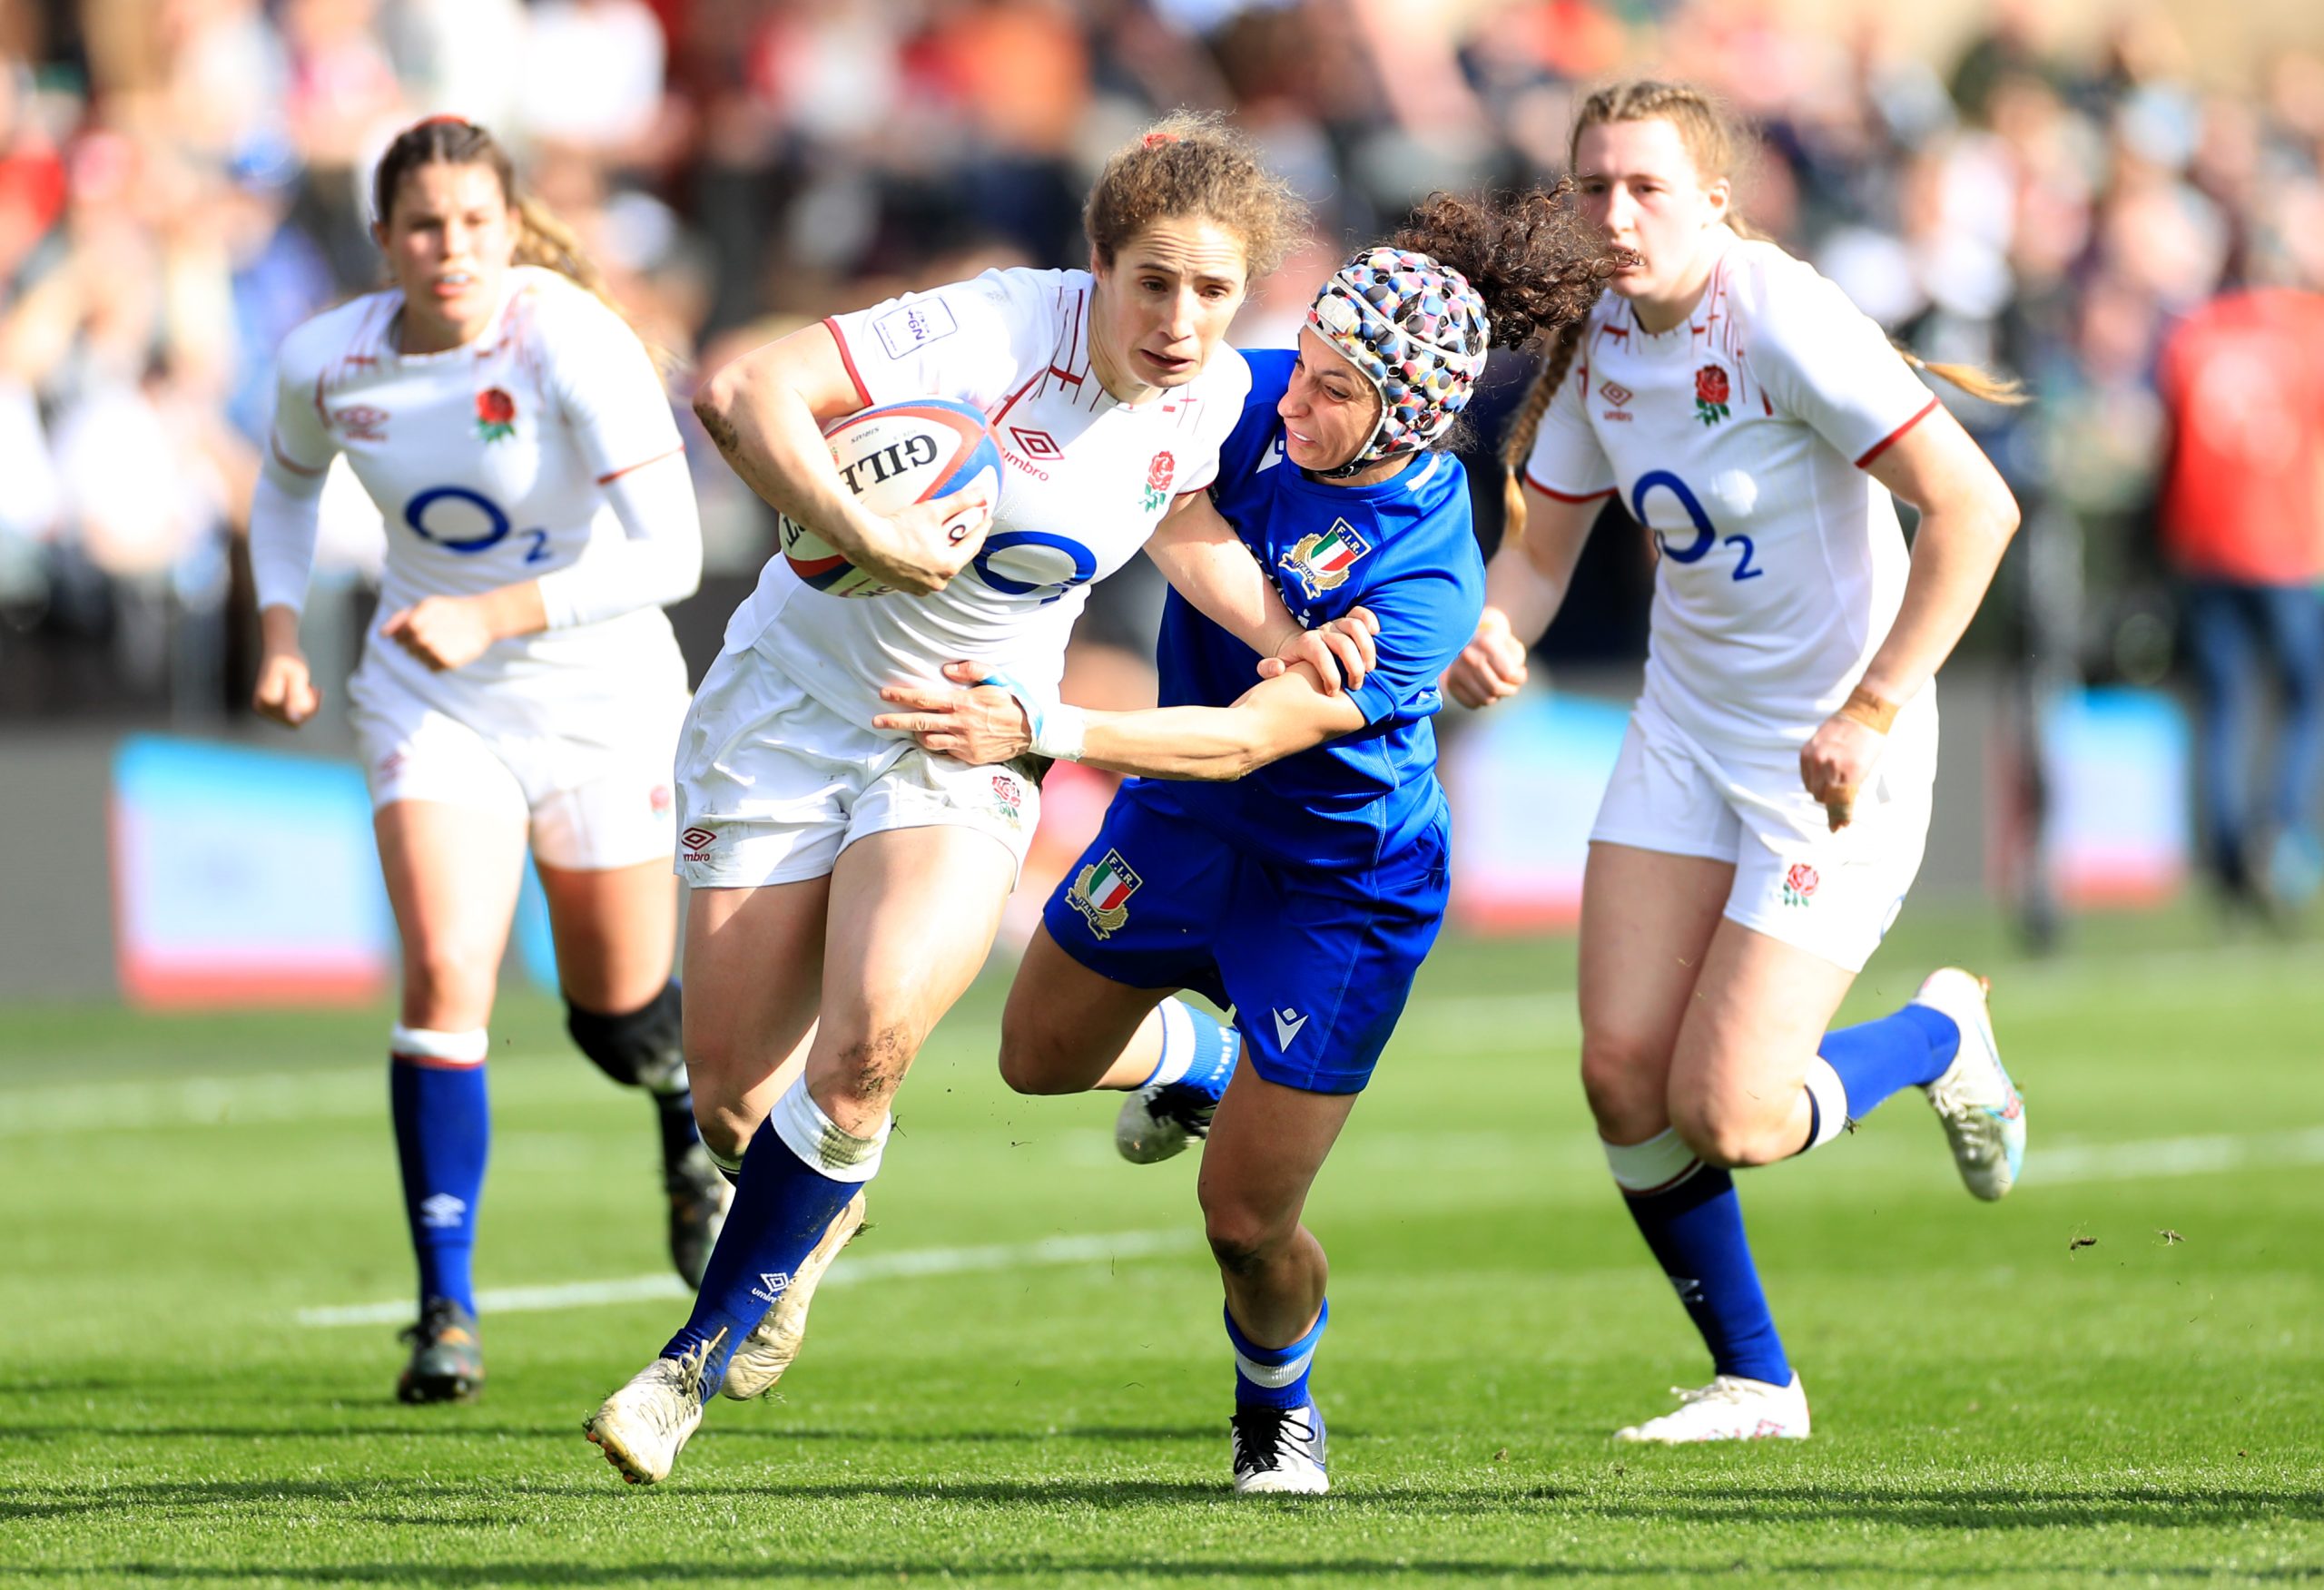 England happy to inspire fans across country after Twickenham success – Abby Dow